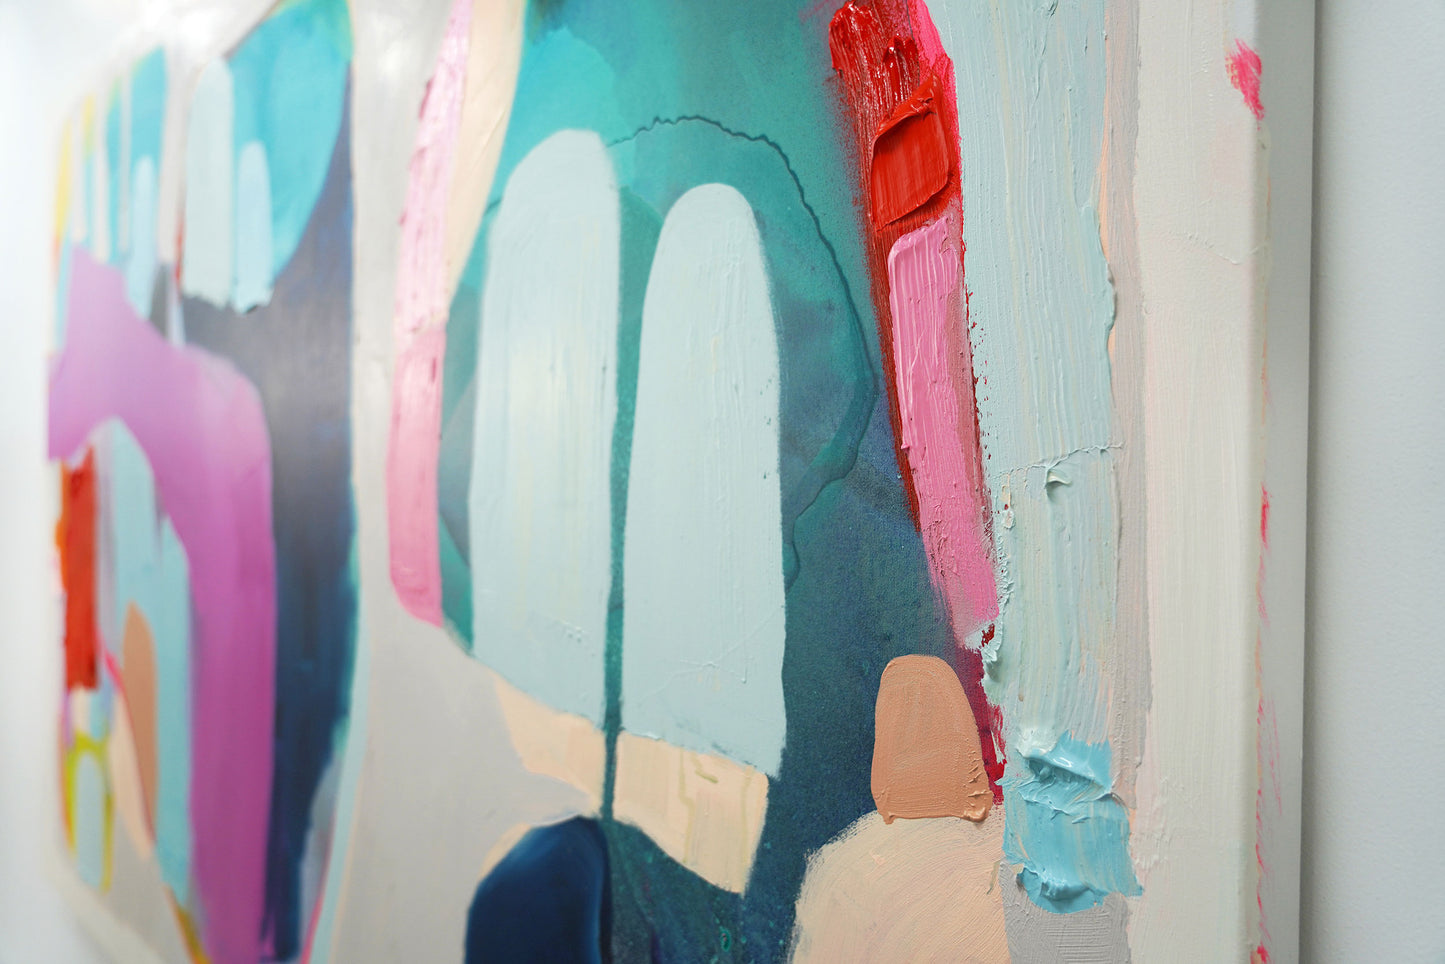 Side view: Abstract painting, Fingers and Toes, by artist Claire Desjardins.